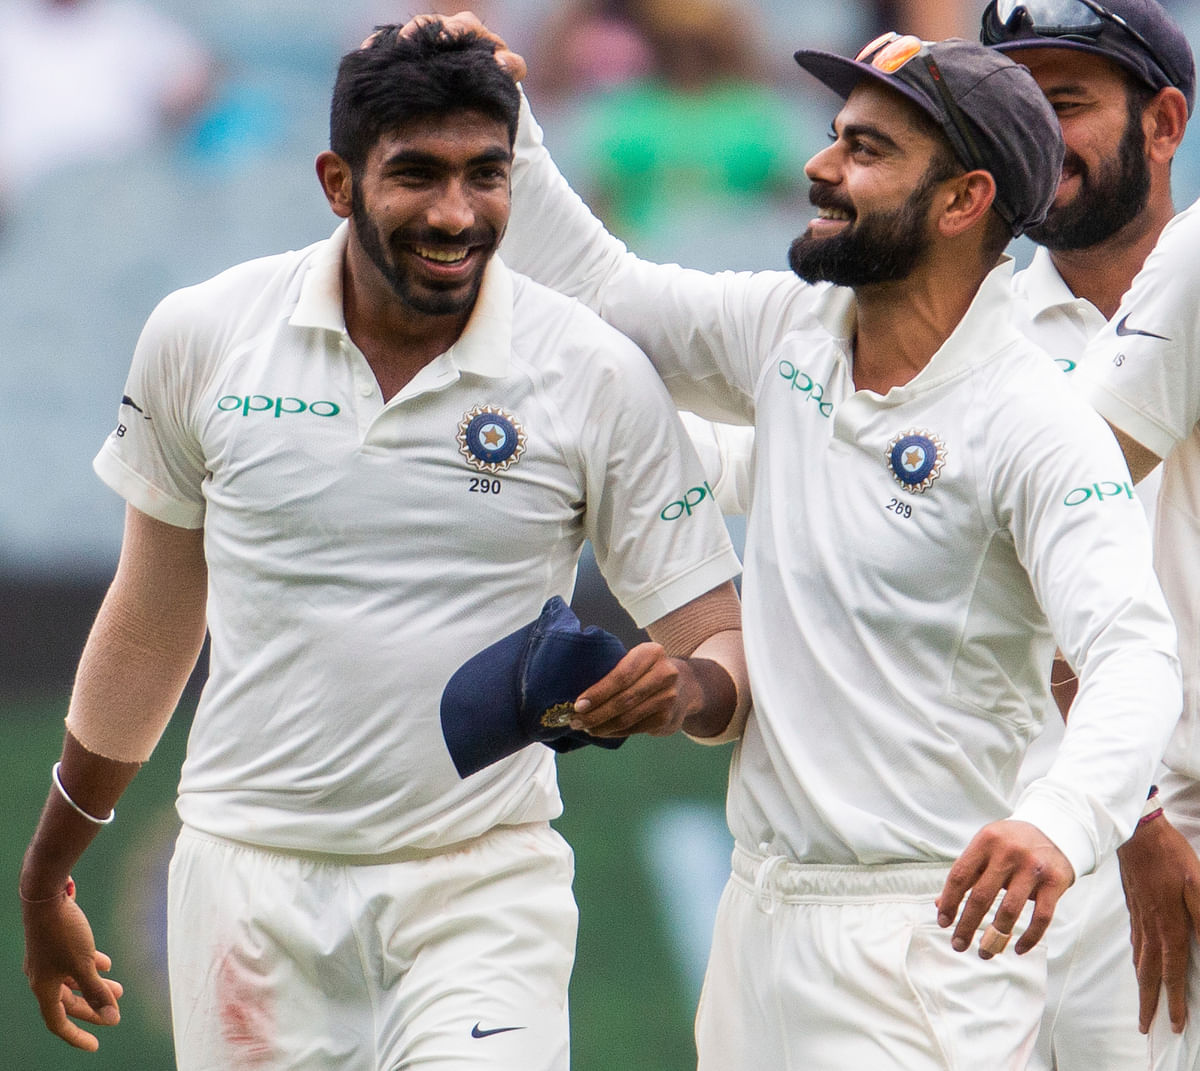 Six players who stepped up for India and helped the team win the first-ever Test series in Australia.